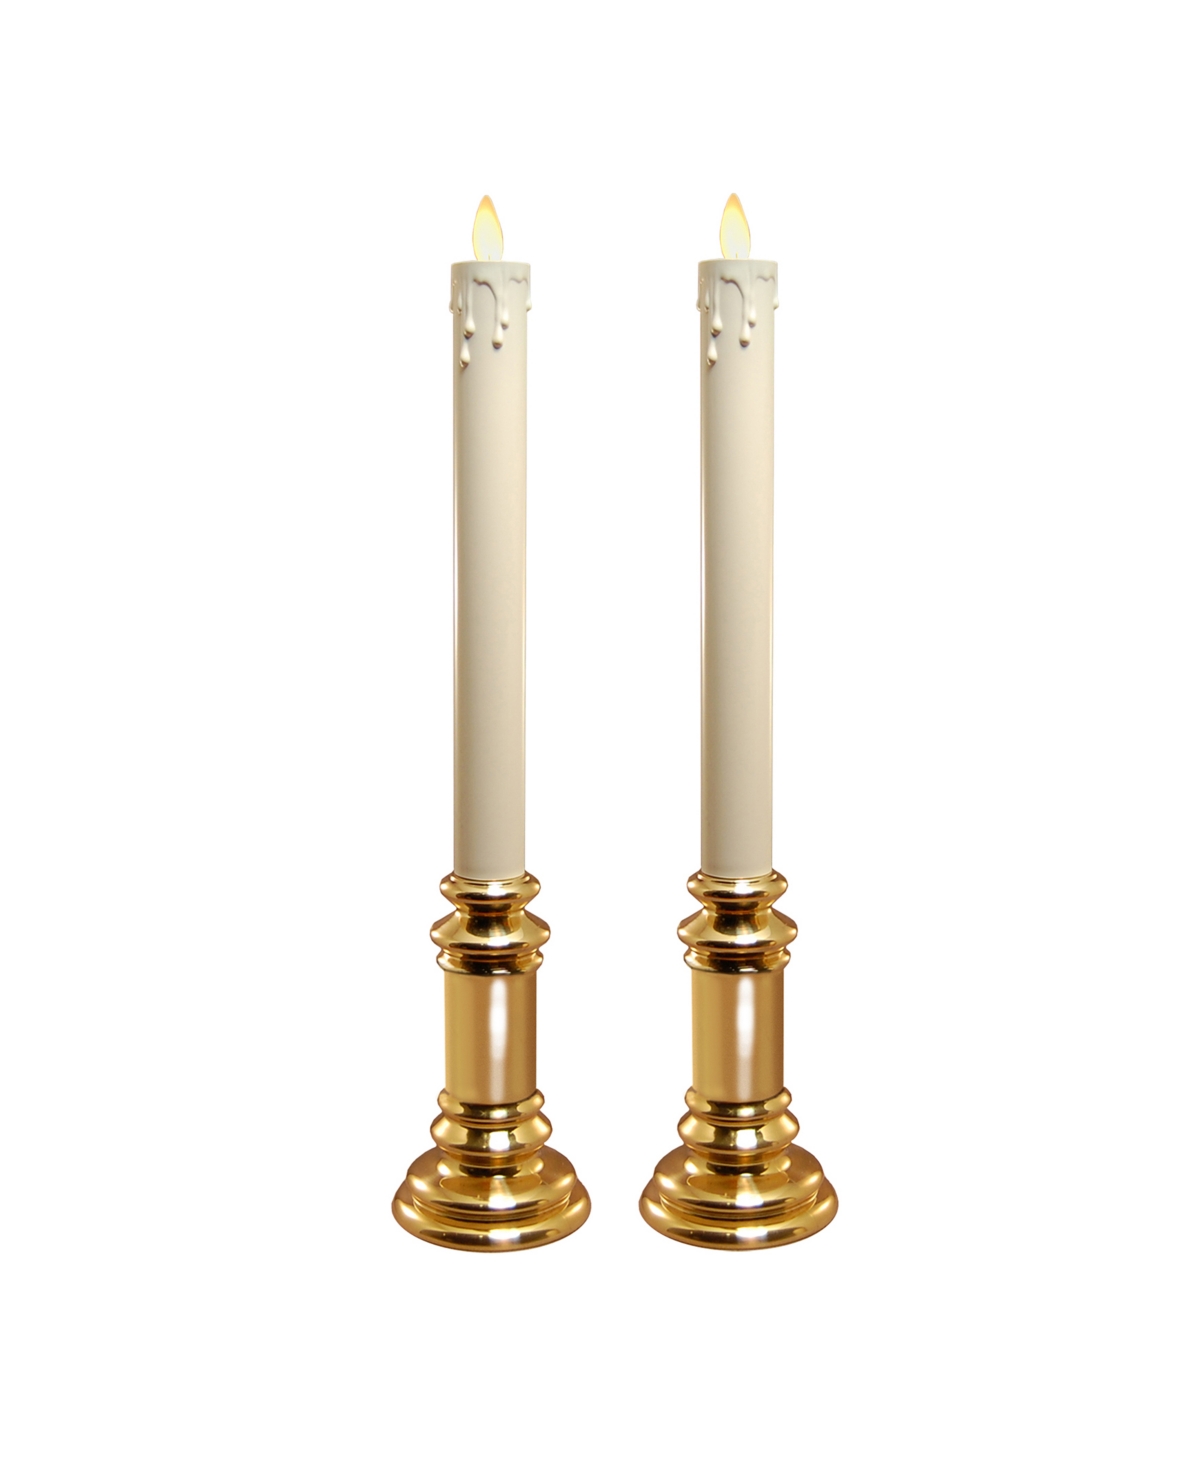 Lumabase Set of 2 Battery Operated Led Taper Candles with Moving Flame and Holders - Natural